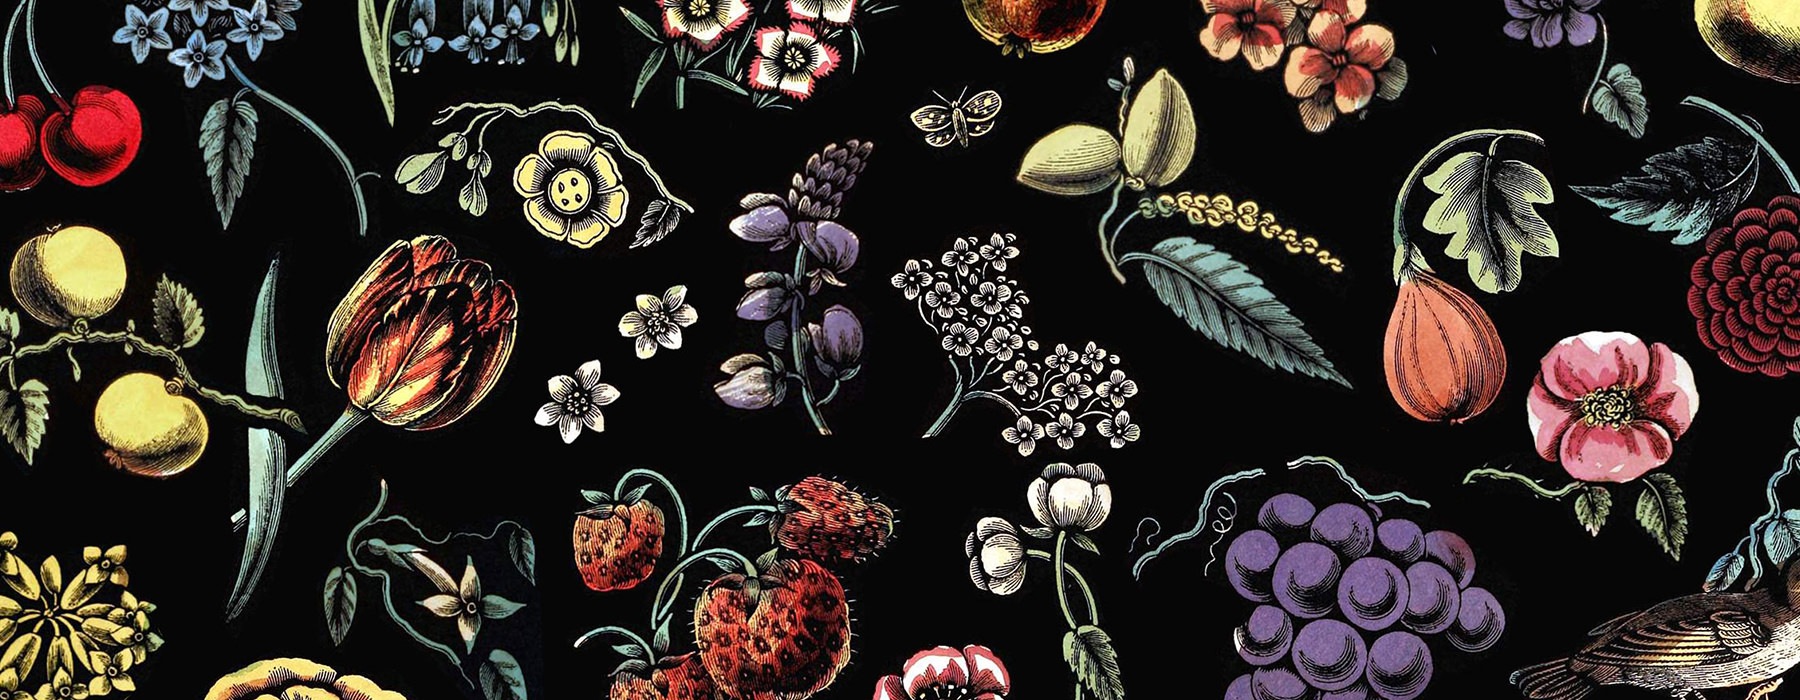 branded graphic of property patterns and floral shapes